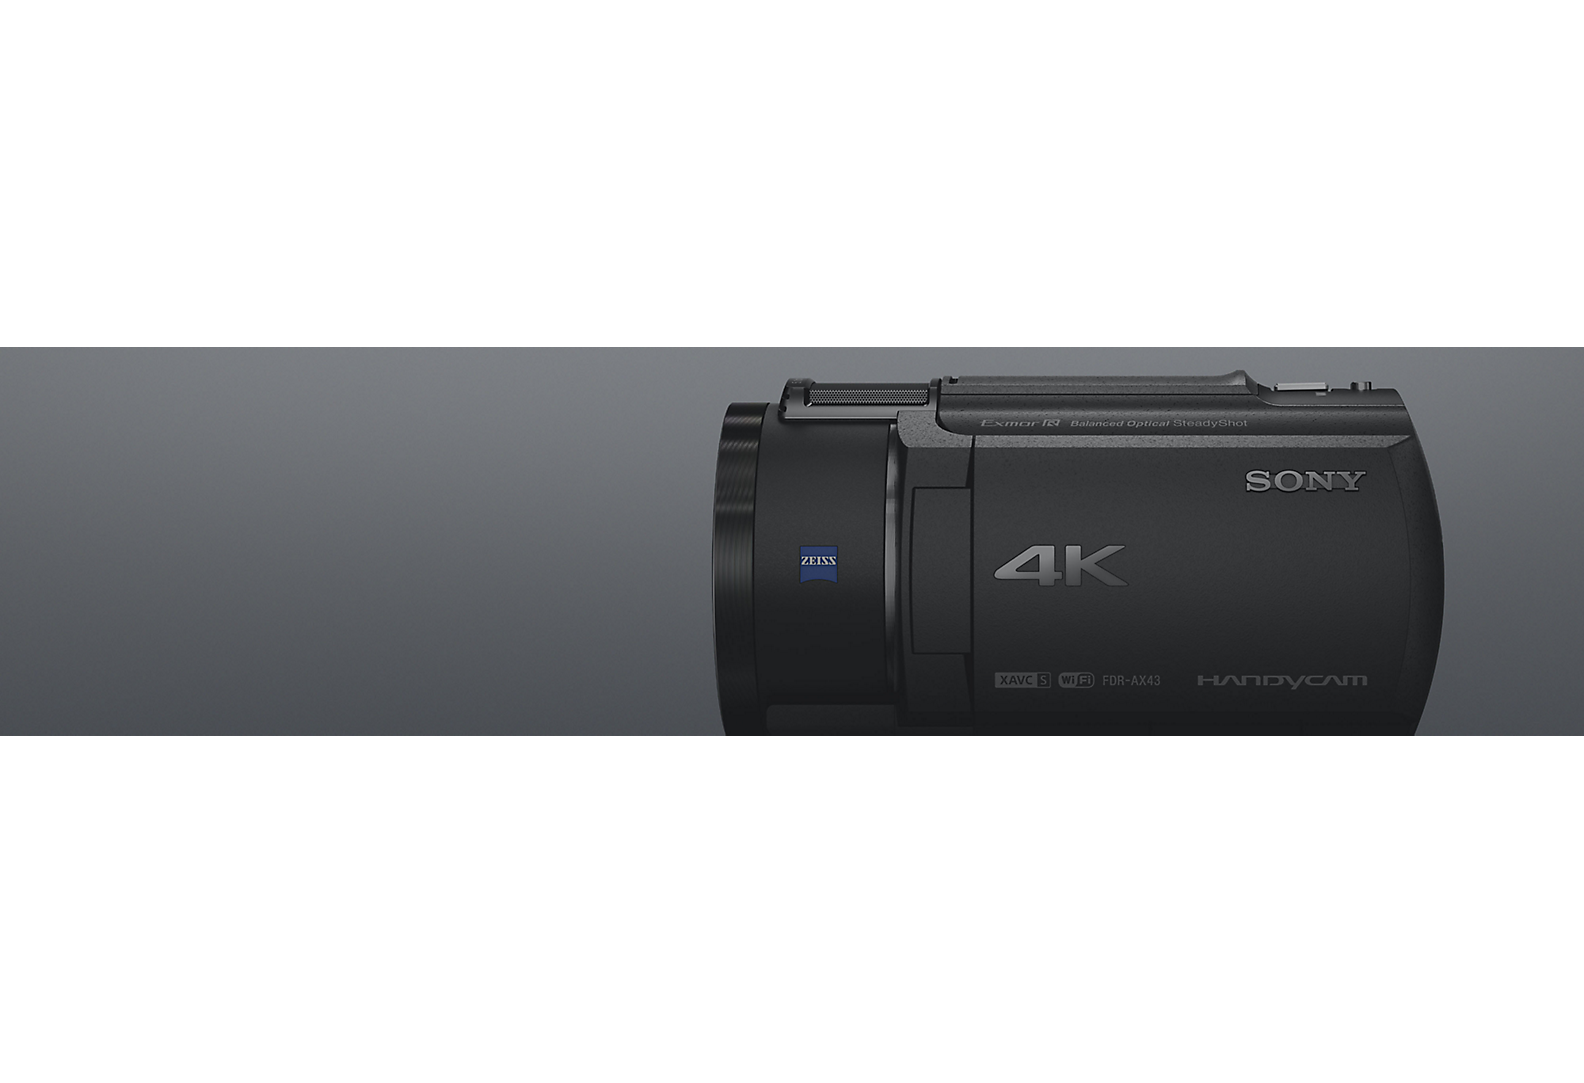  Side view of Sony 4K Handycam camcorder